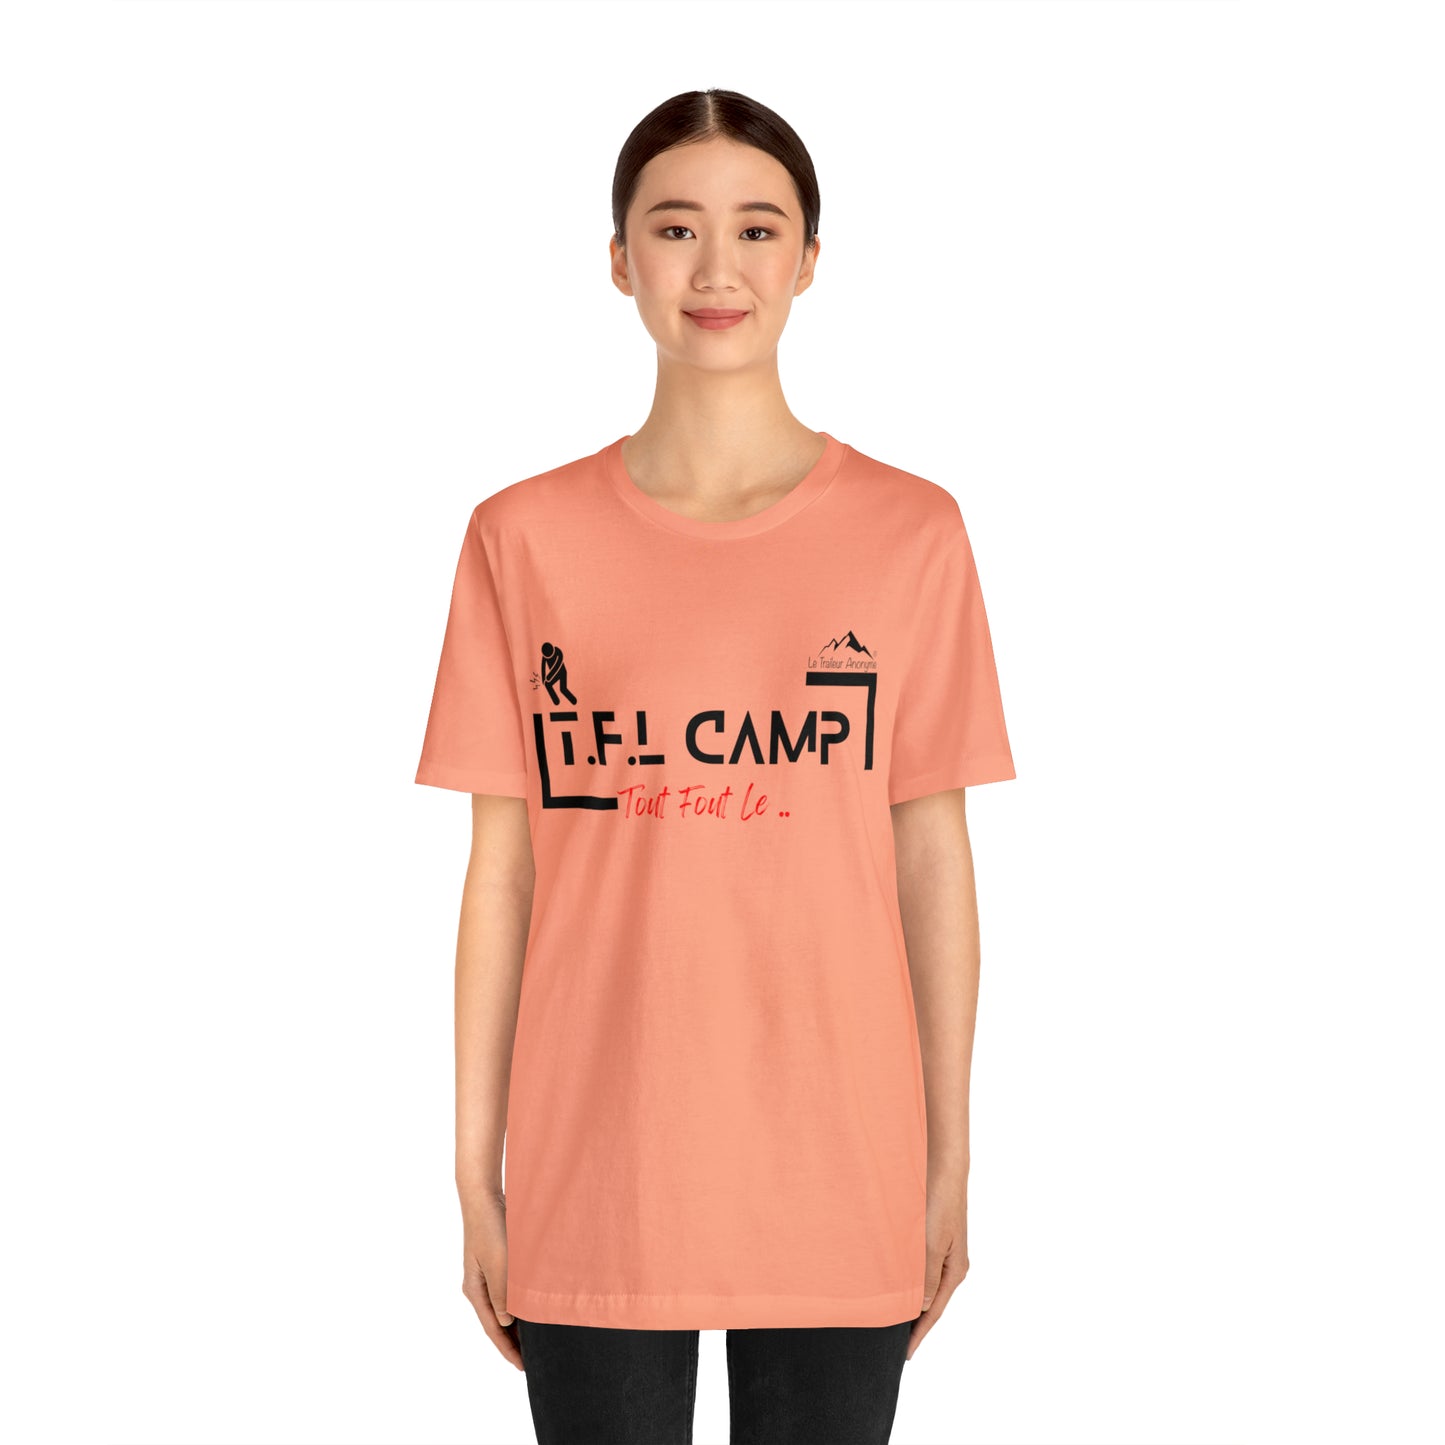 T-Shirt Jersey - Unisexe - Collection "T.F.L."  (950)